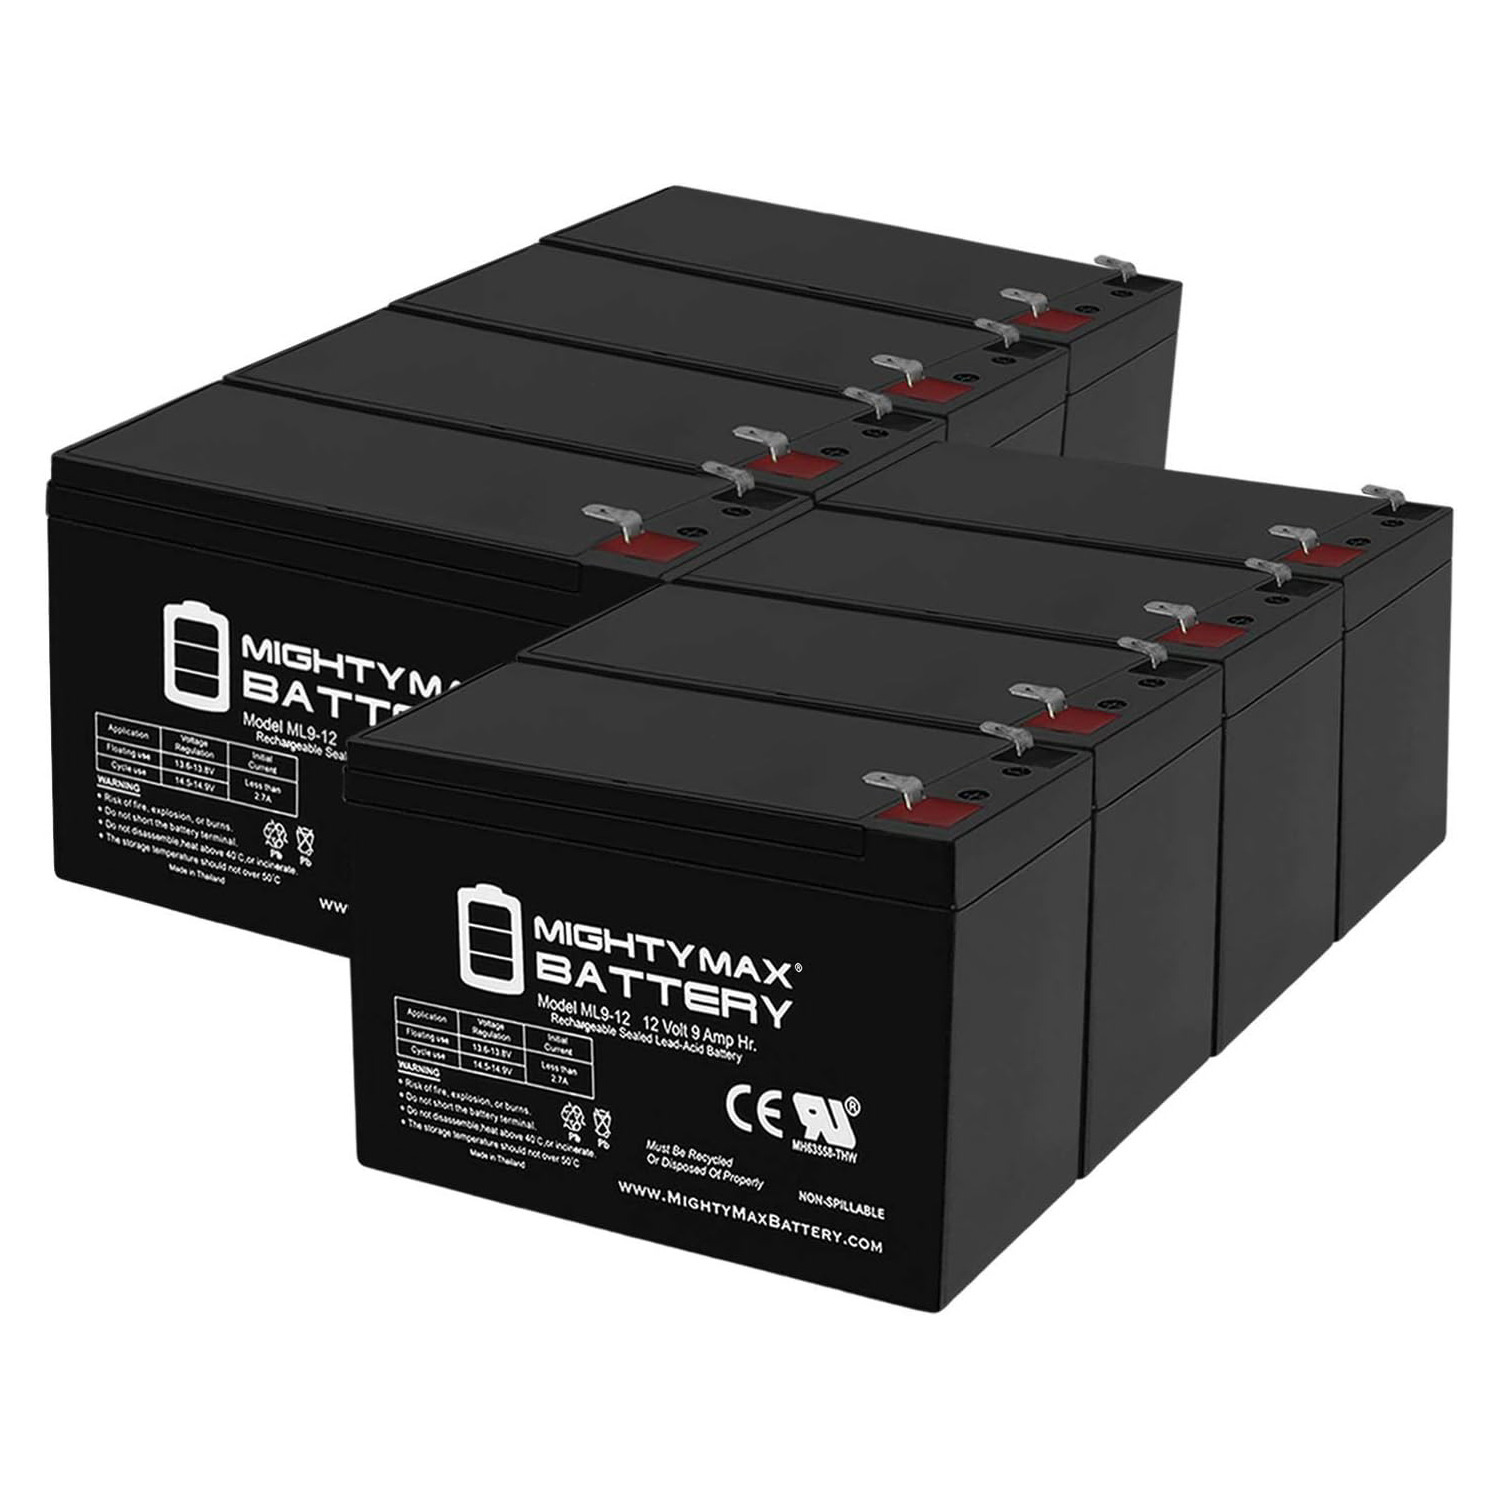 Altronix SMP5PMCTXPD8CB 12V, 9Ah Lead Acid Battery - 8 Pack